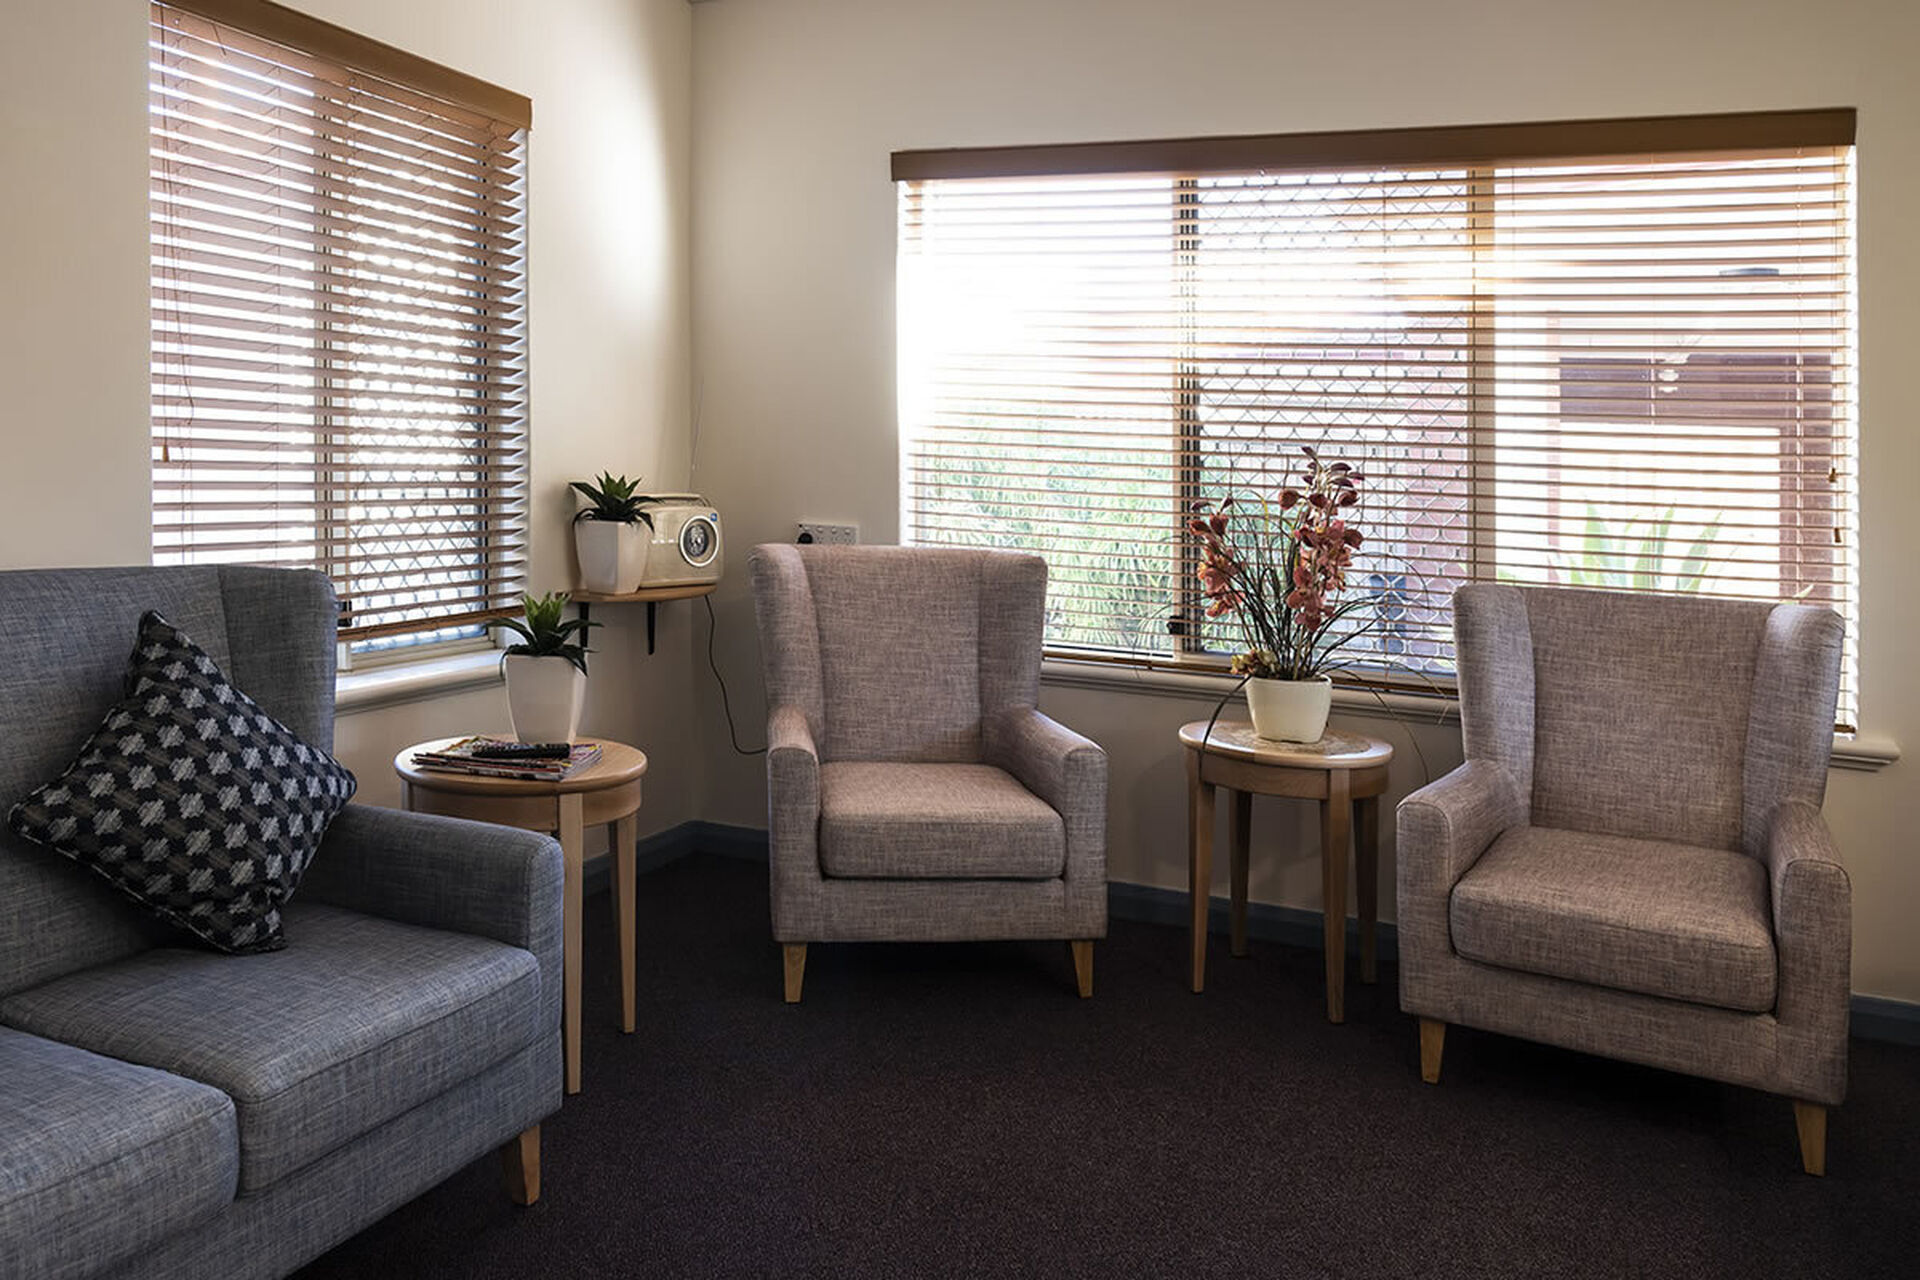 spacious sitting area for nursing home residents at baptistcare gracehaven aged care home in rockingham wa